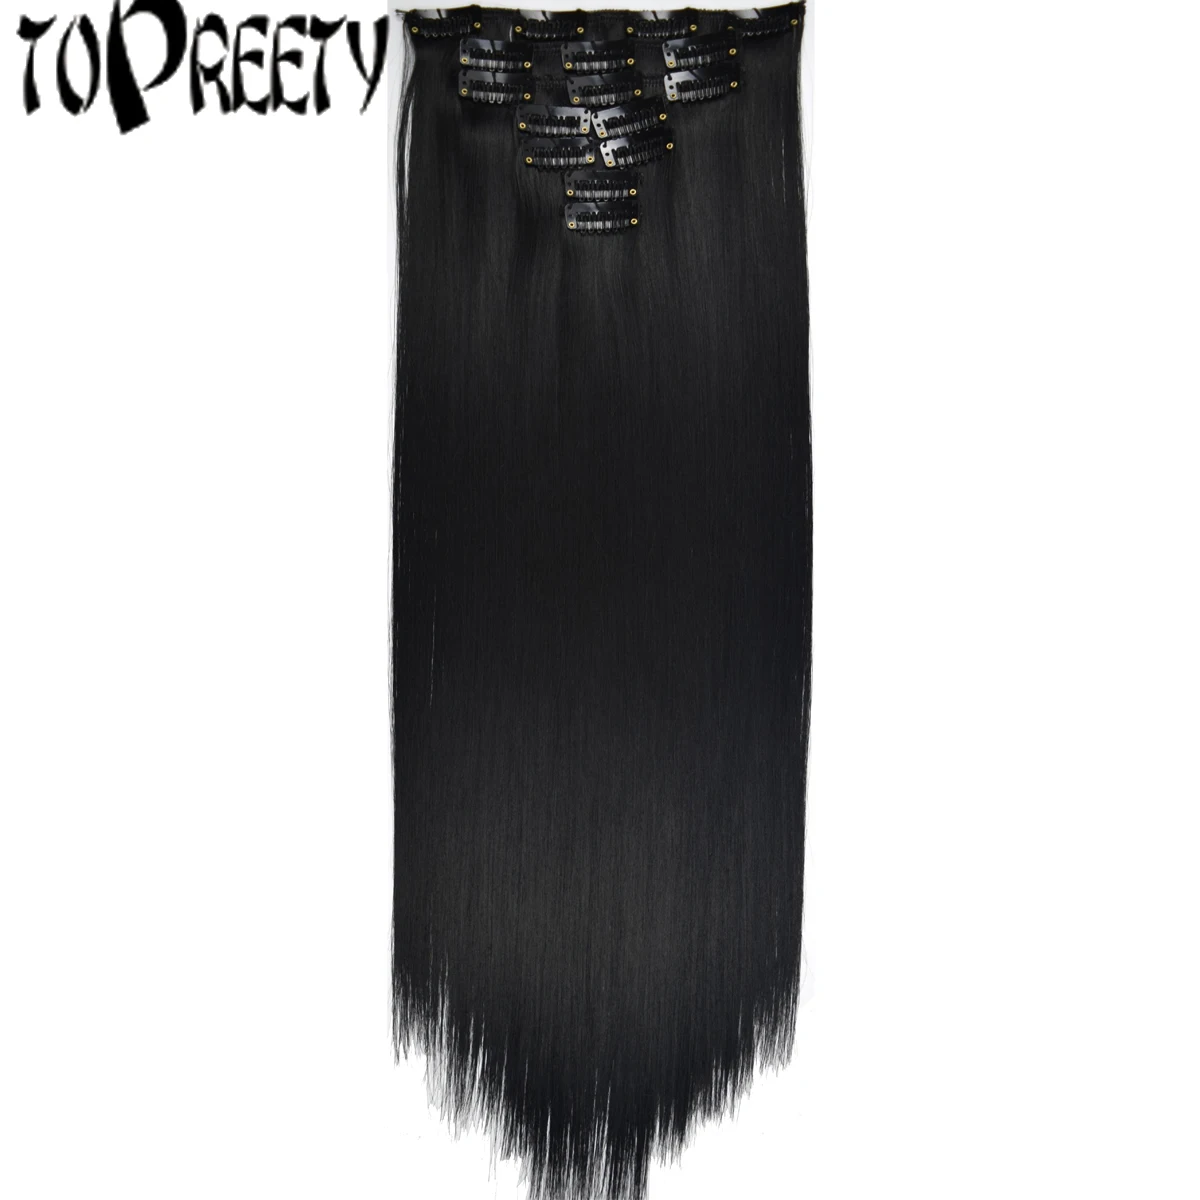 TOPREETY Heat Resistant B5 Synthetic Fiber 130gr Straight clip in hair Extensions 7006